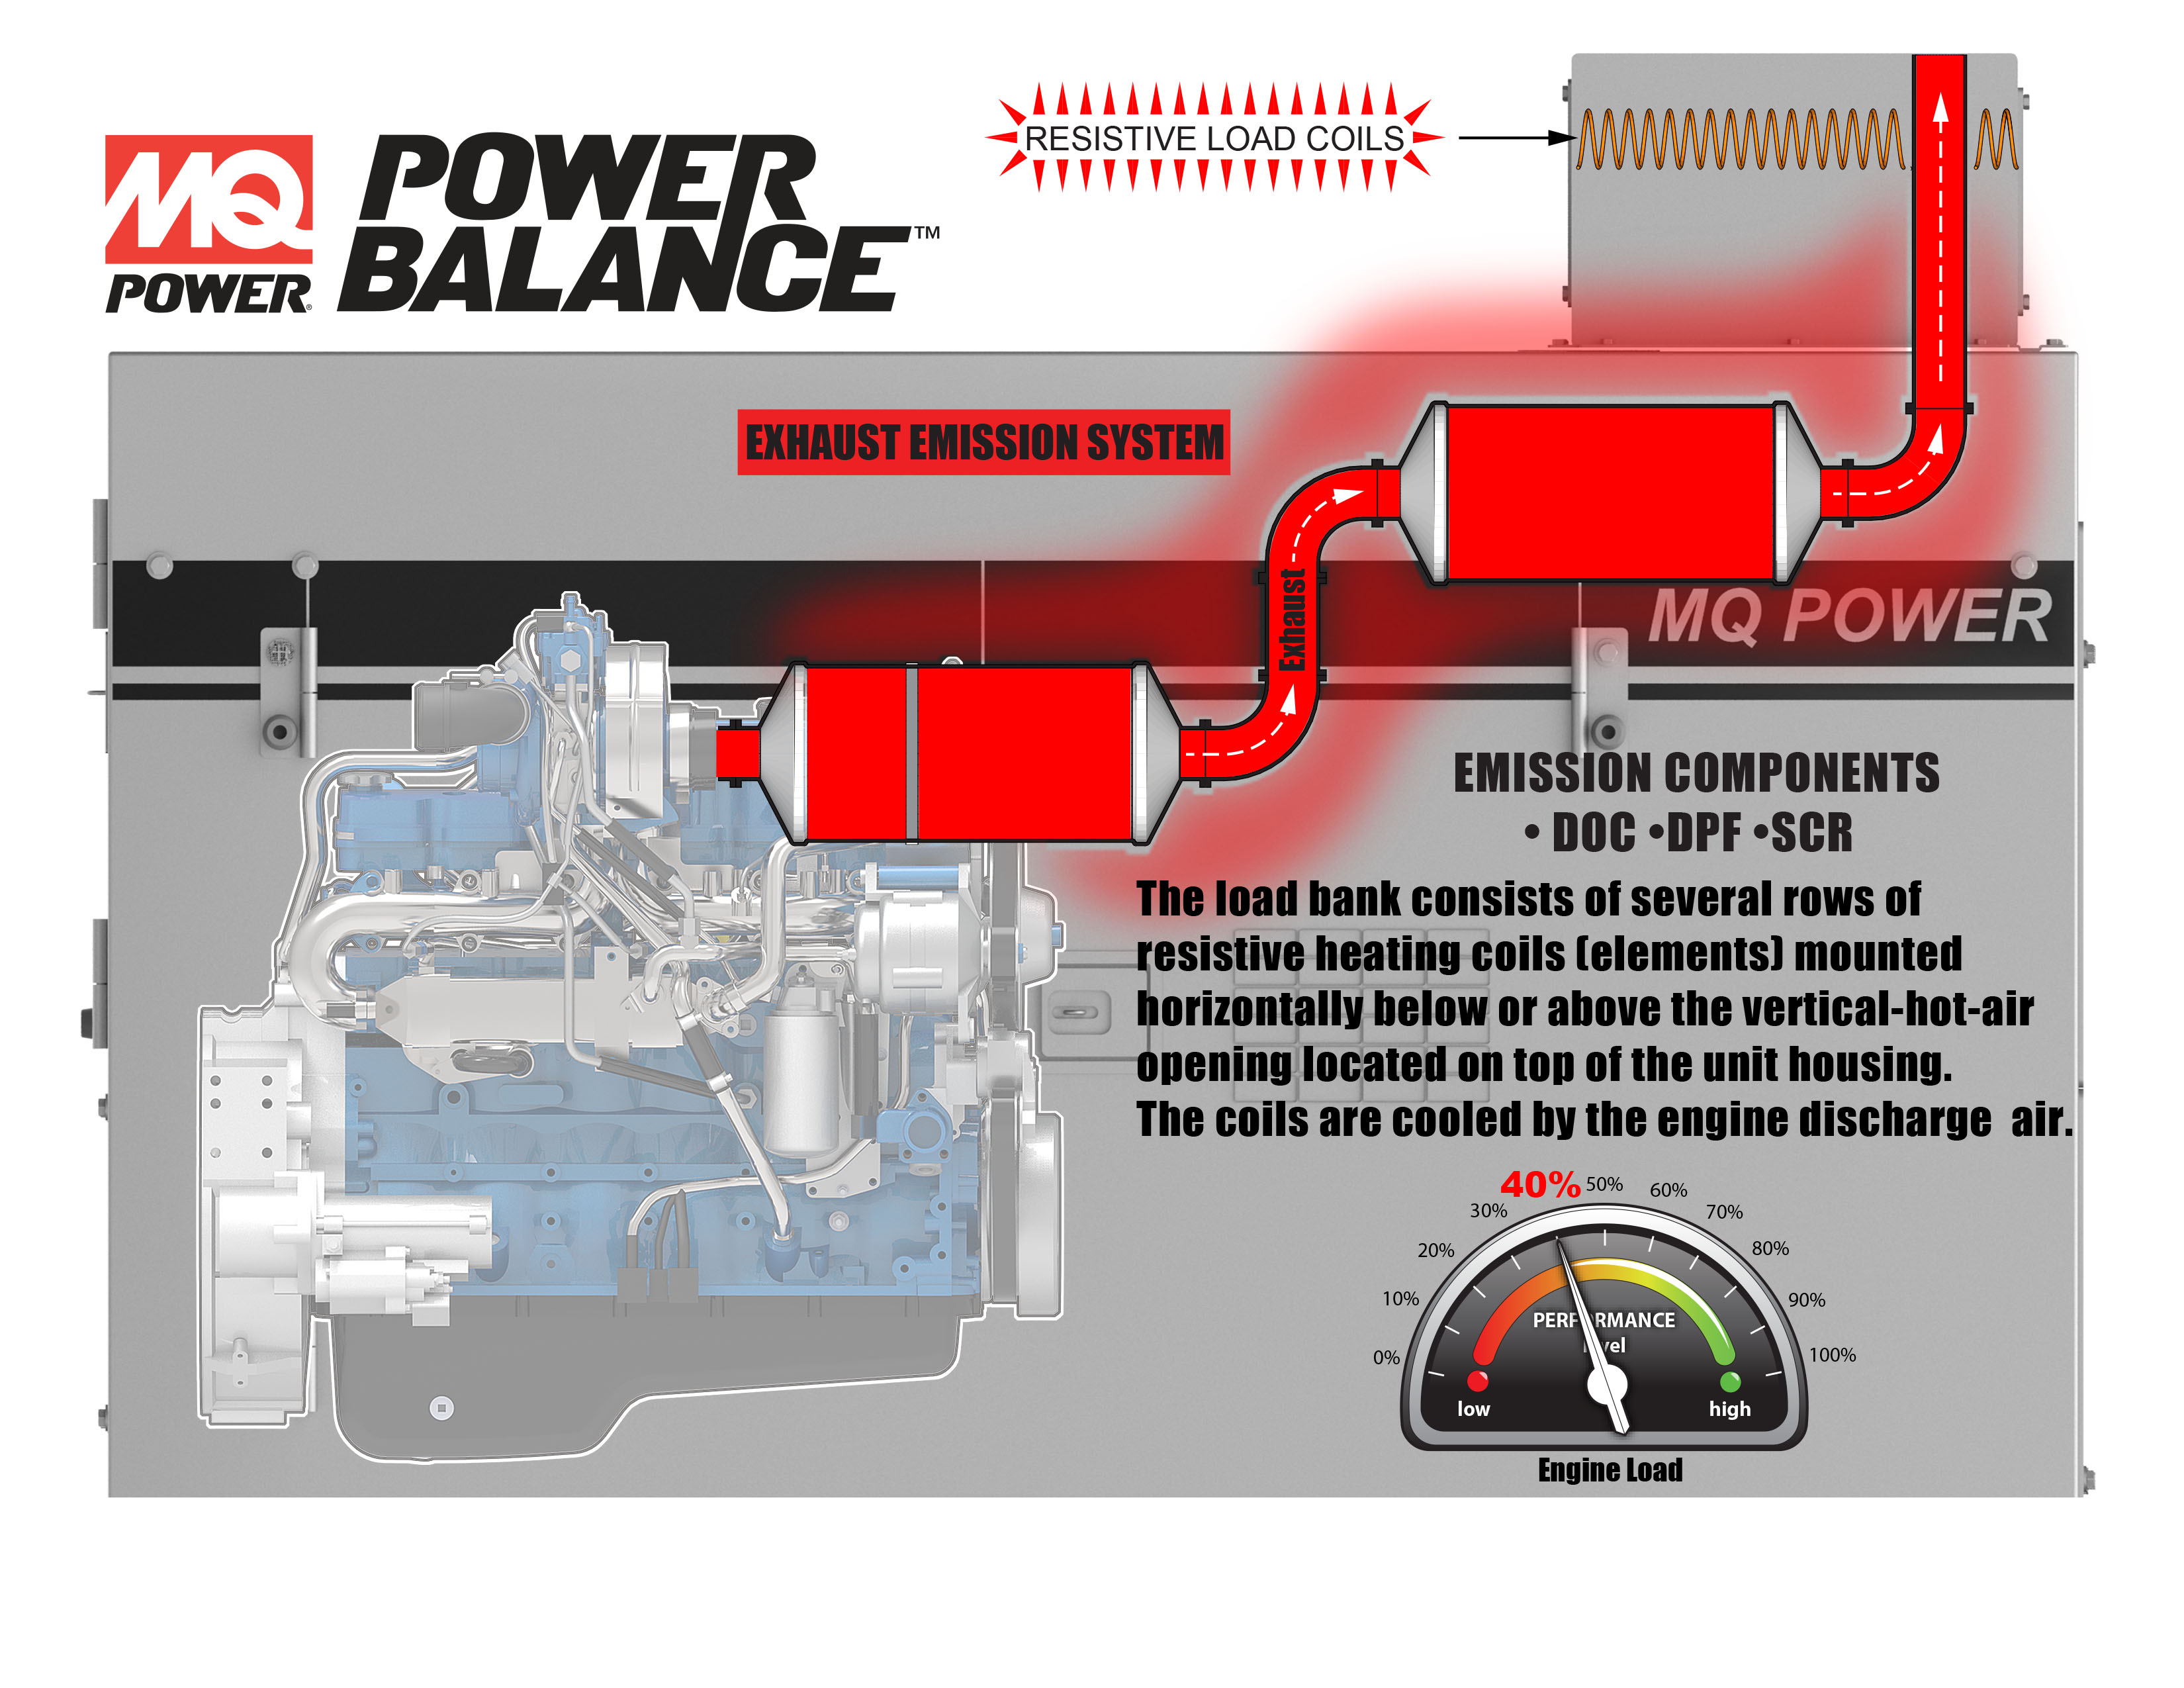 The PowerBalance™ Load Bank consists of several rows of resistive heating coils.